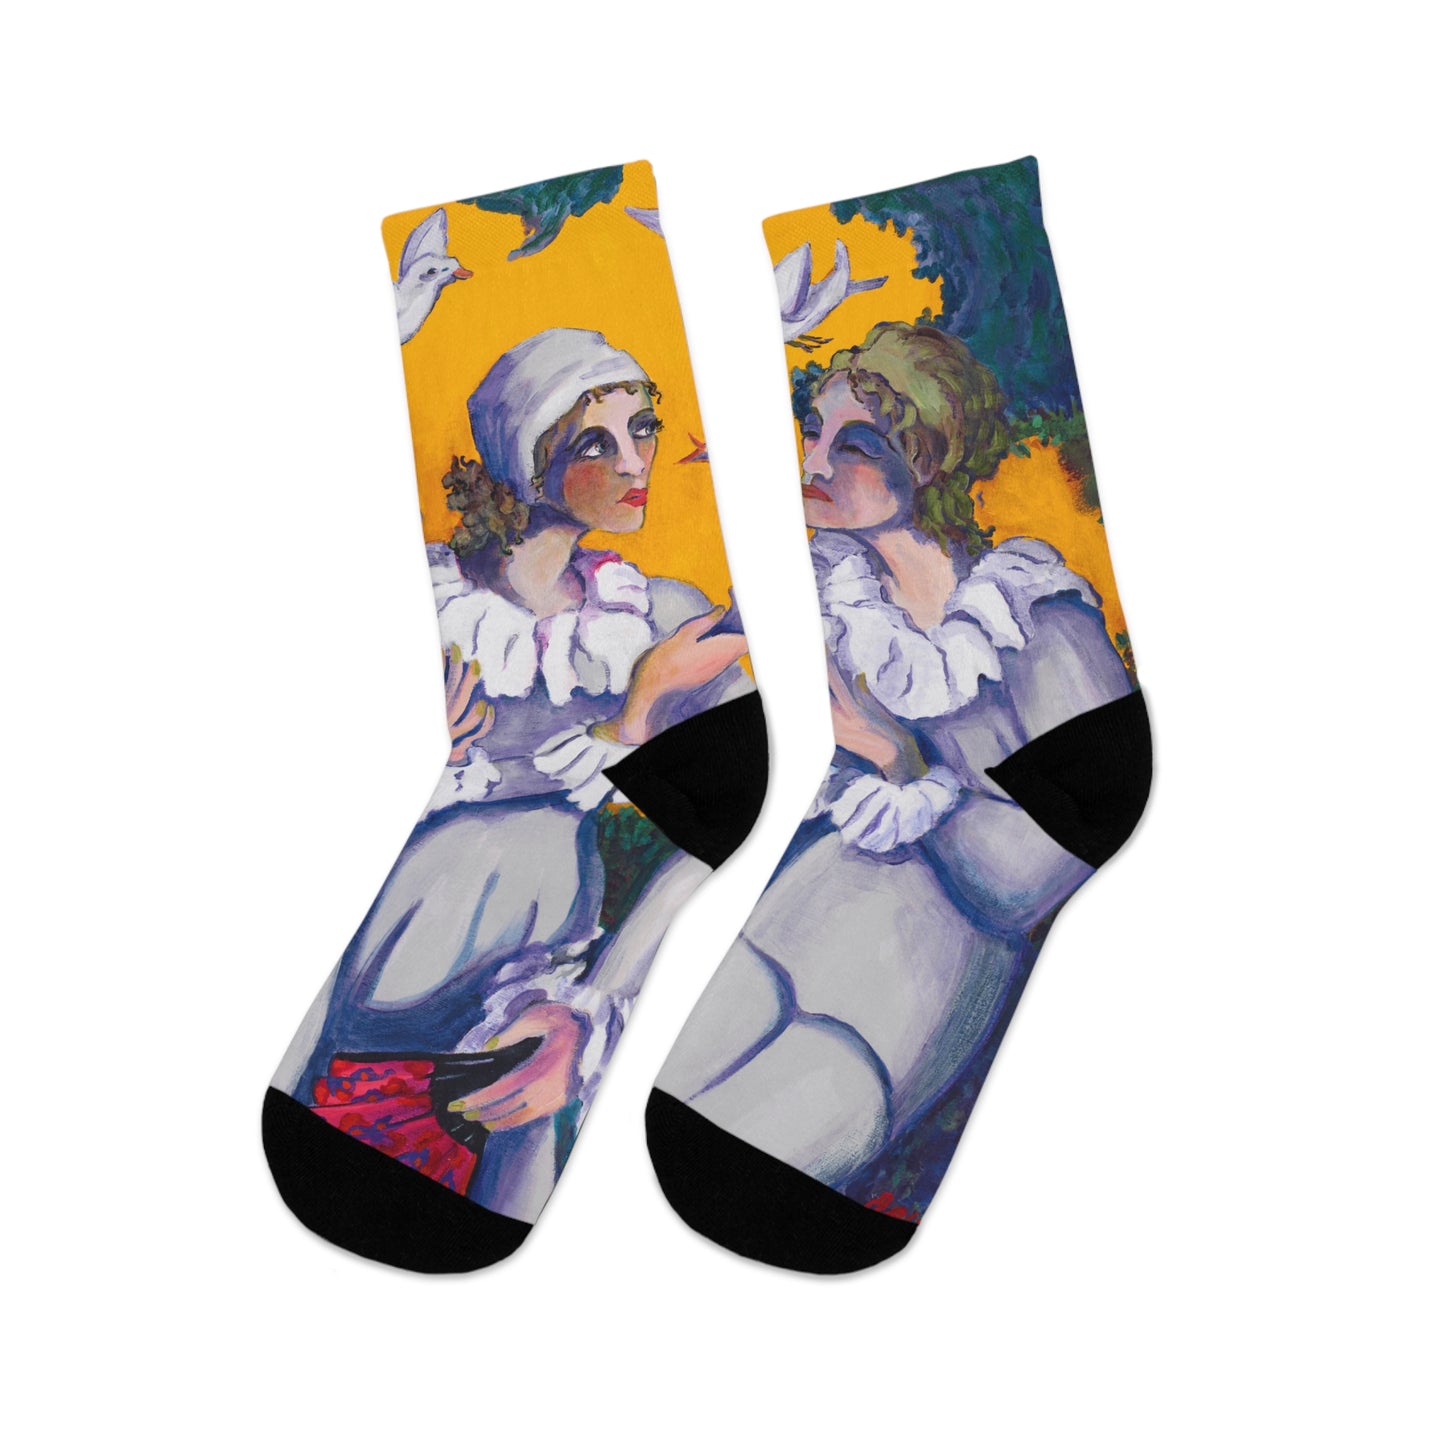 Crew Socks - "Message of the Doves"